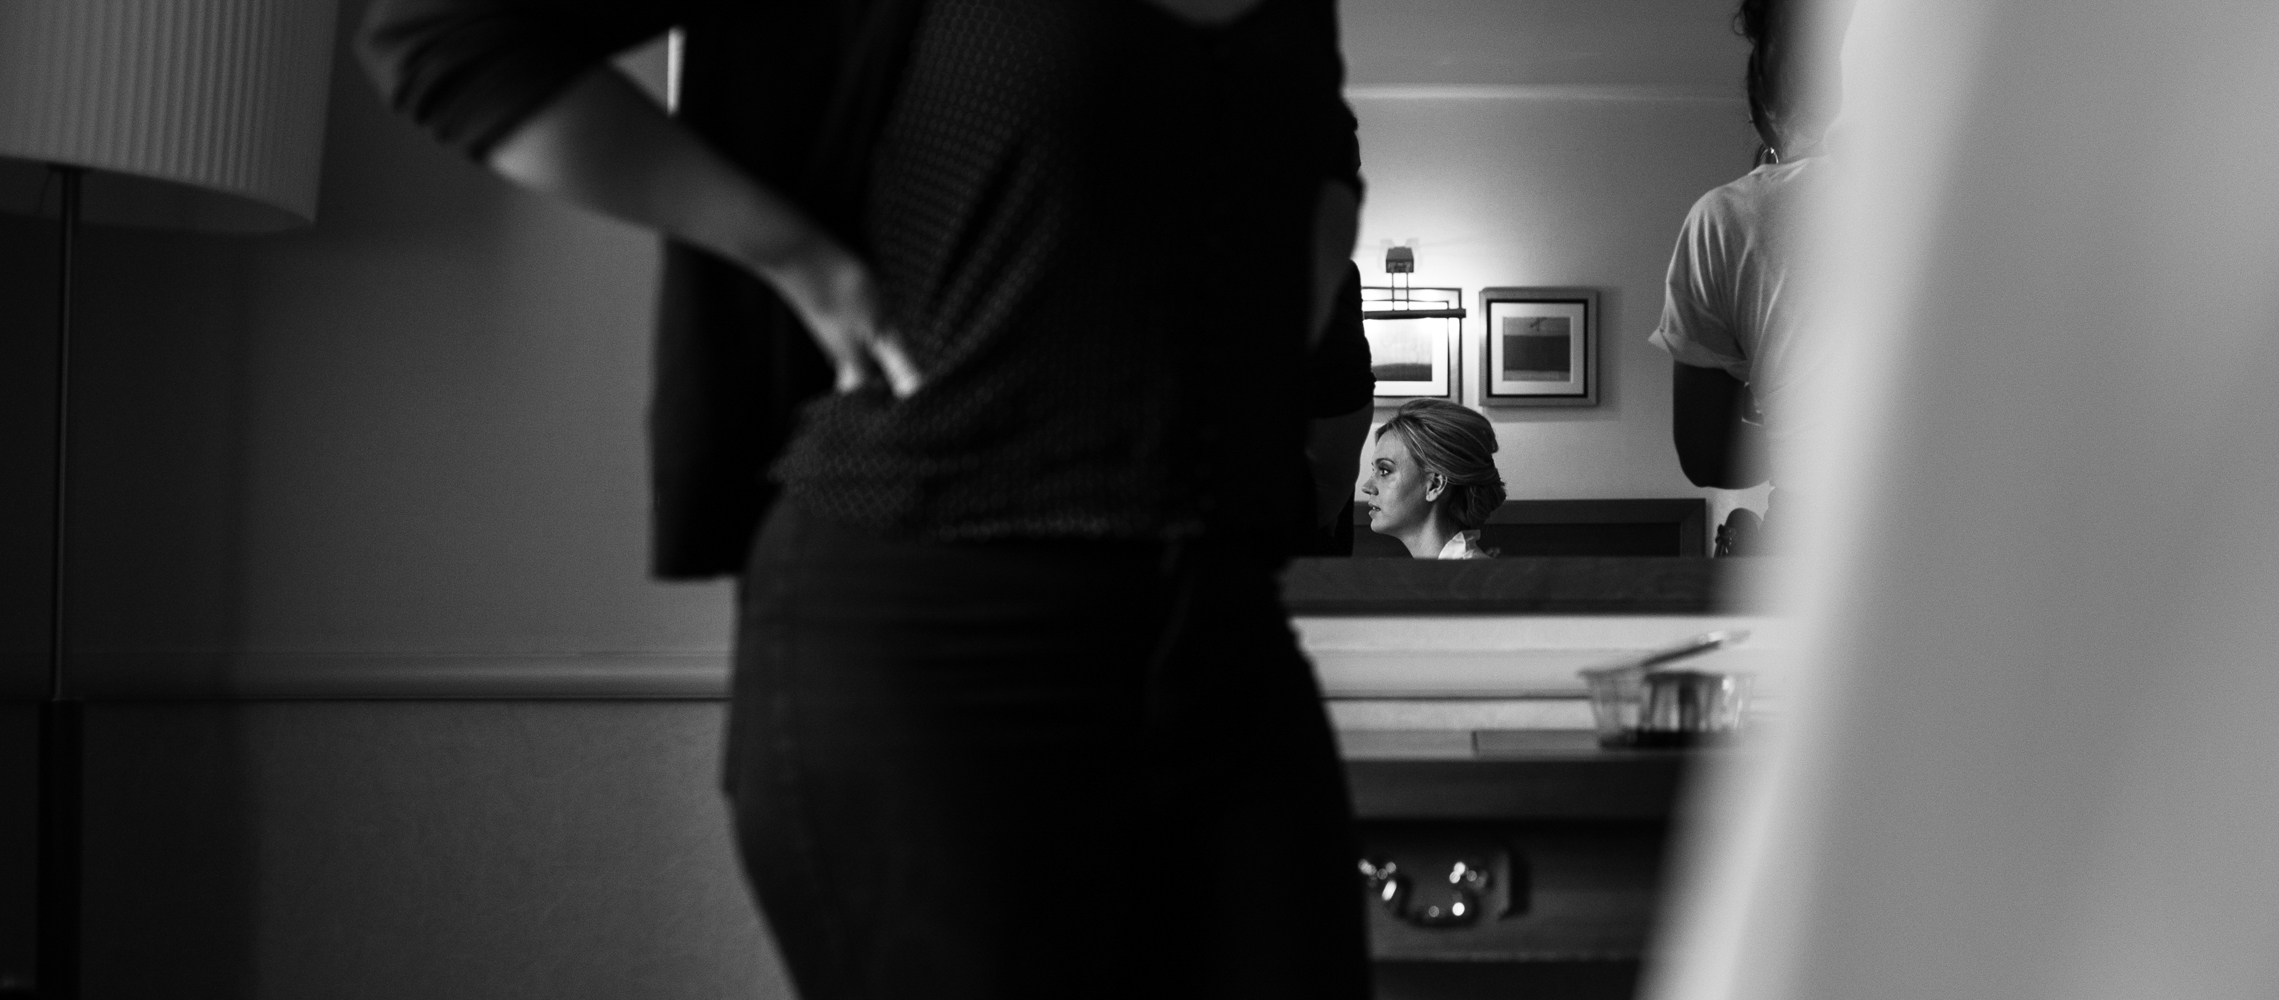 A black and white photo of the bride during preparations